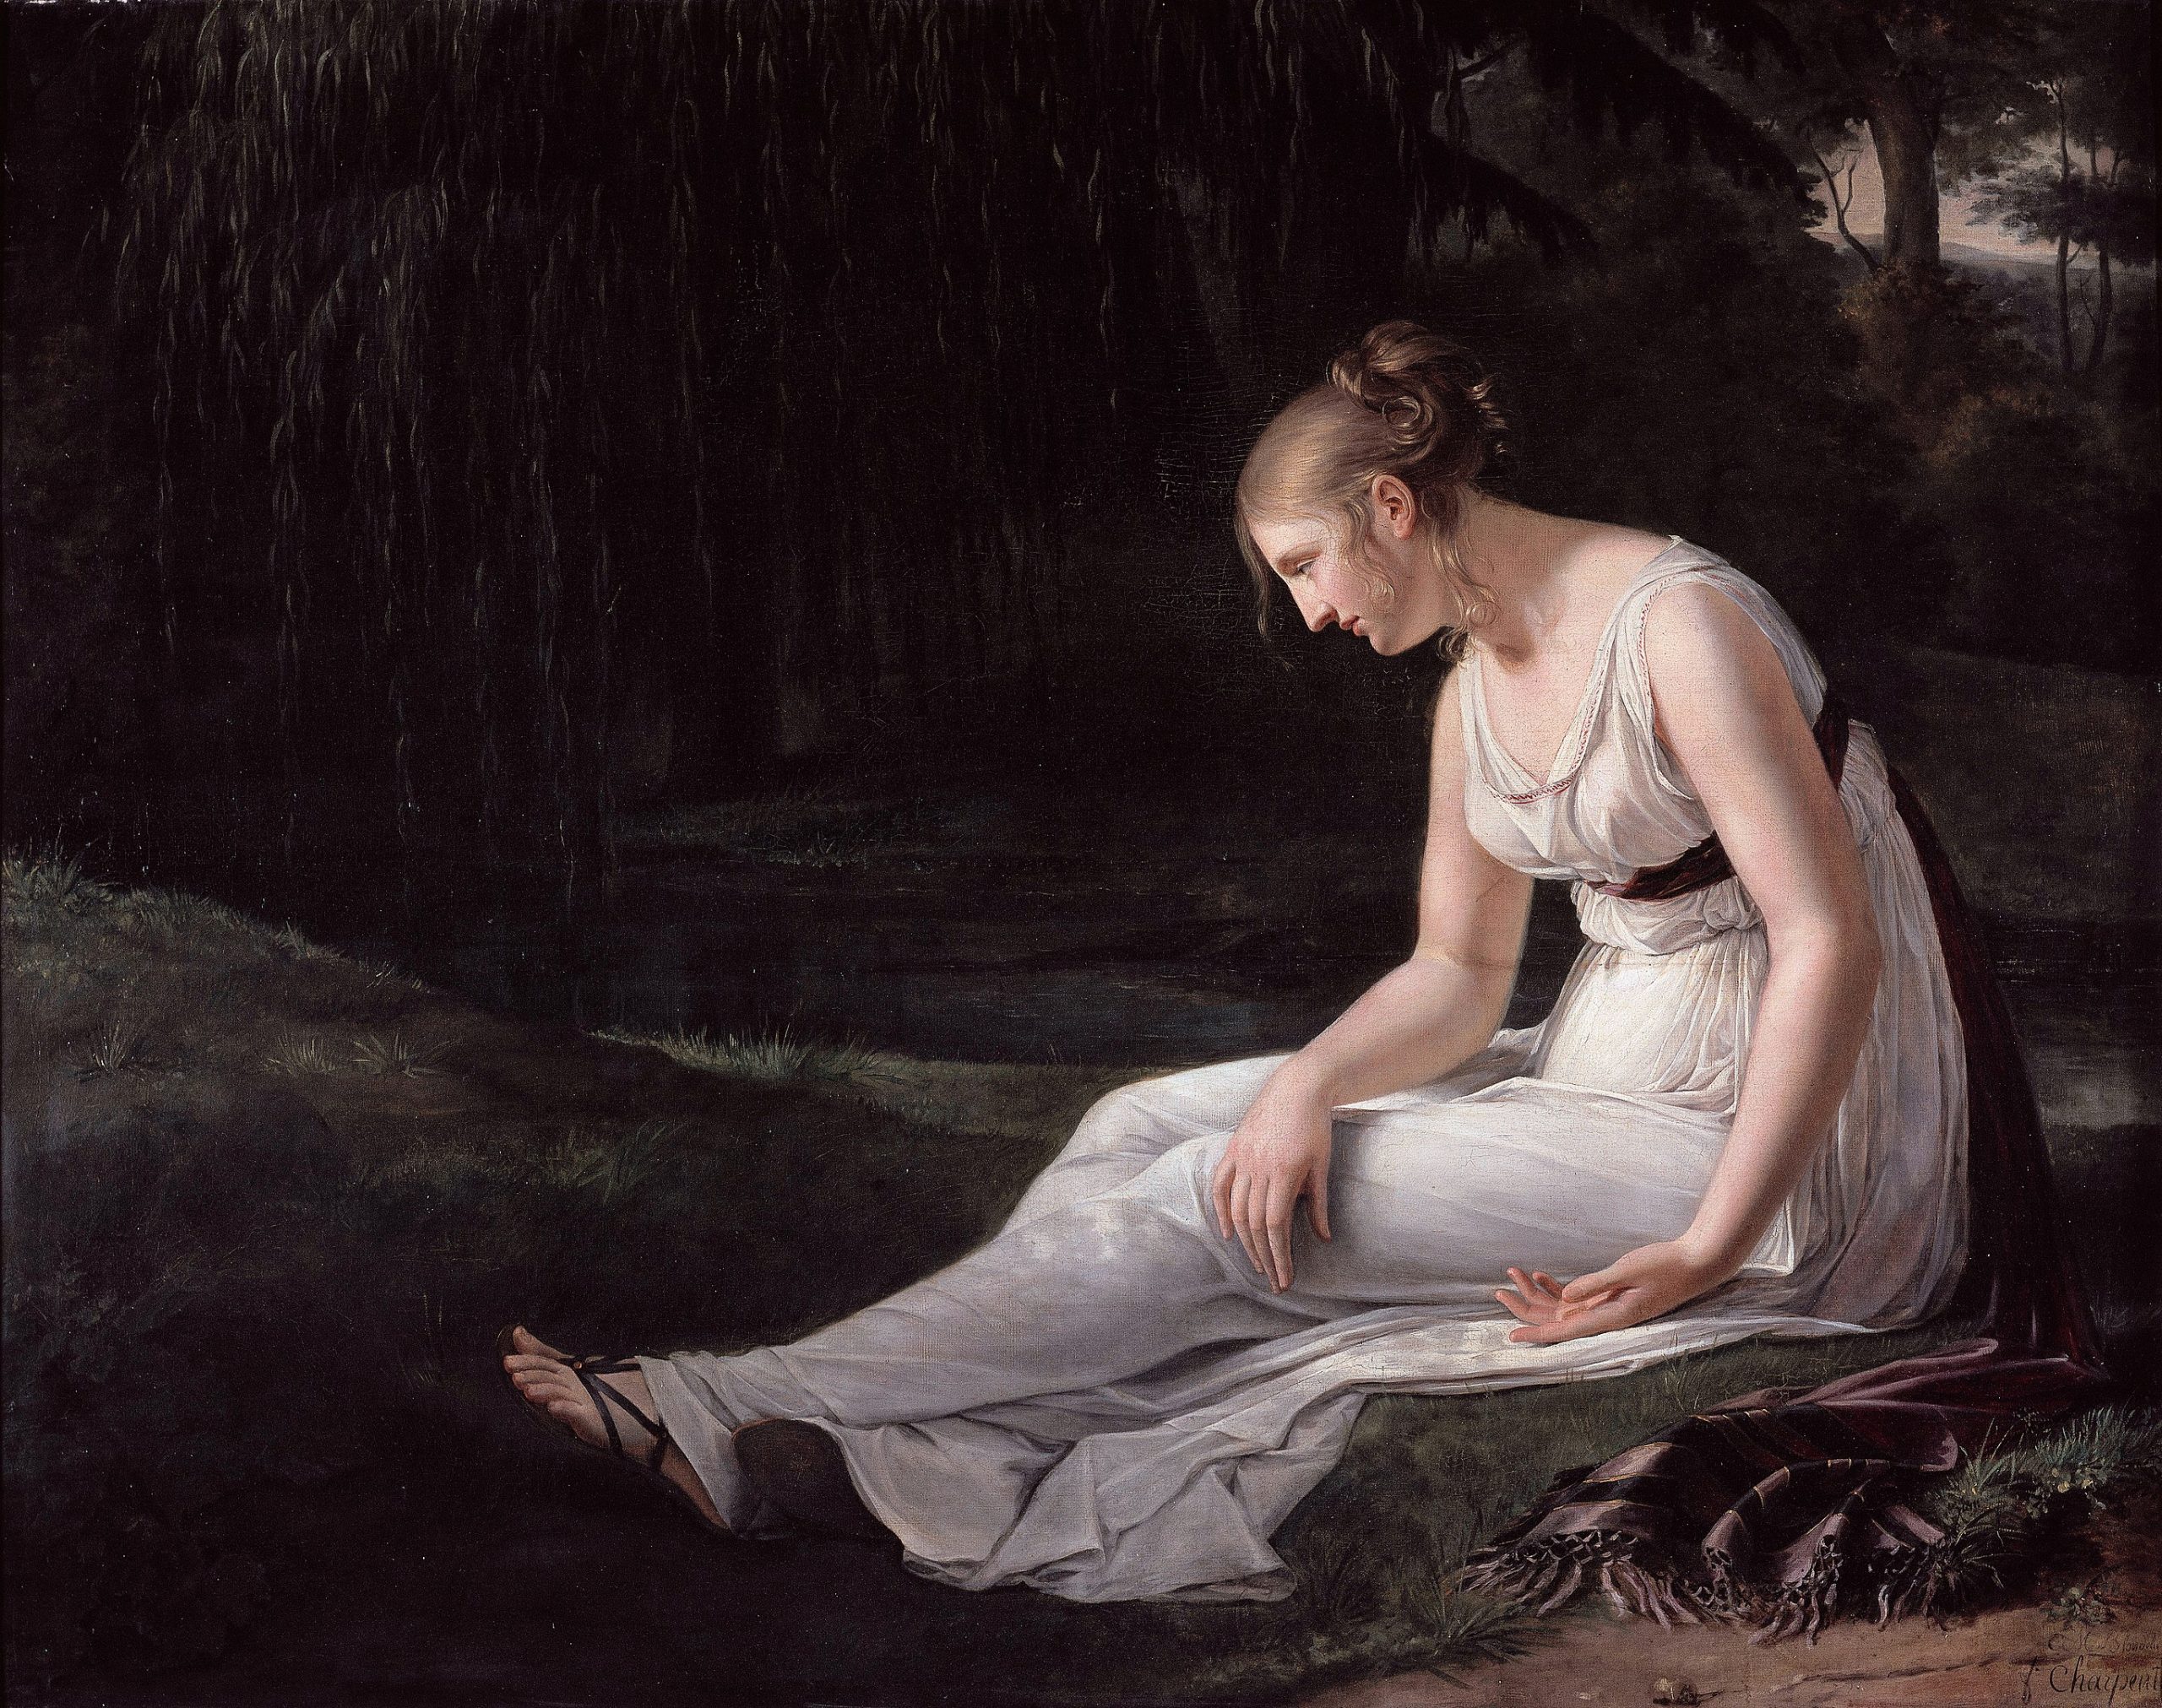 A woman sitting on the grass in the forest with a piece of fabric at her side